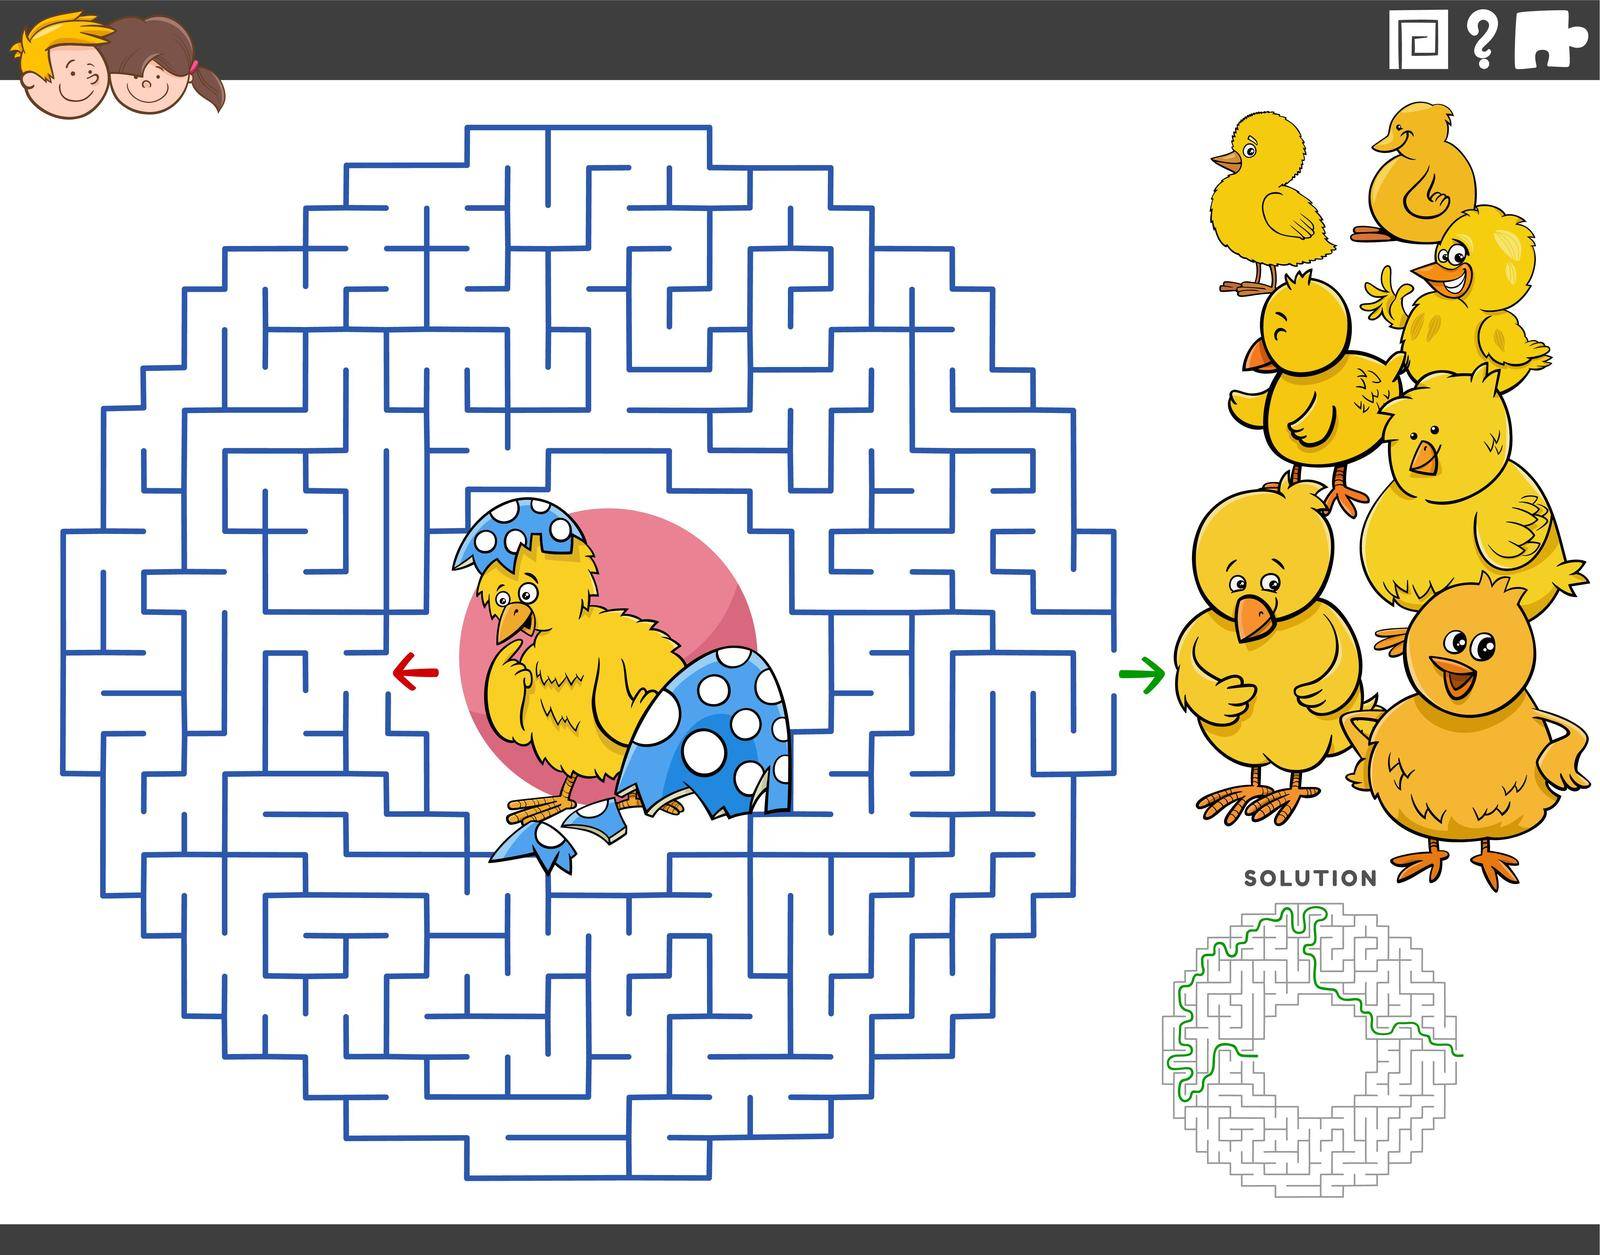 Cartoon illustration of educational maze puzzle game for children with little chick hatched from Easter egg